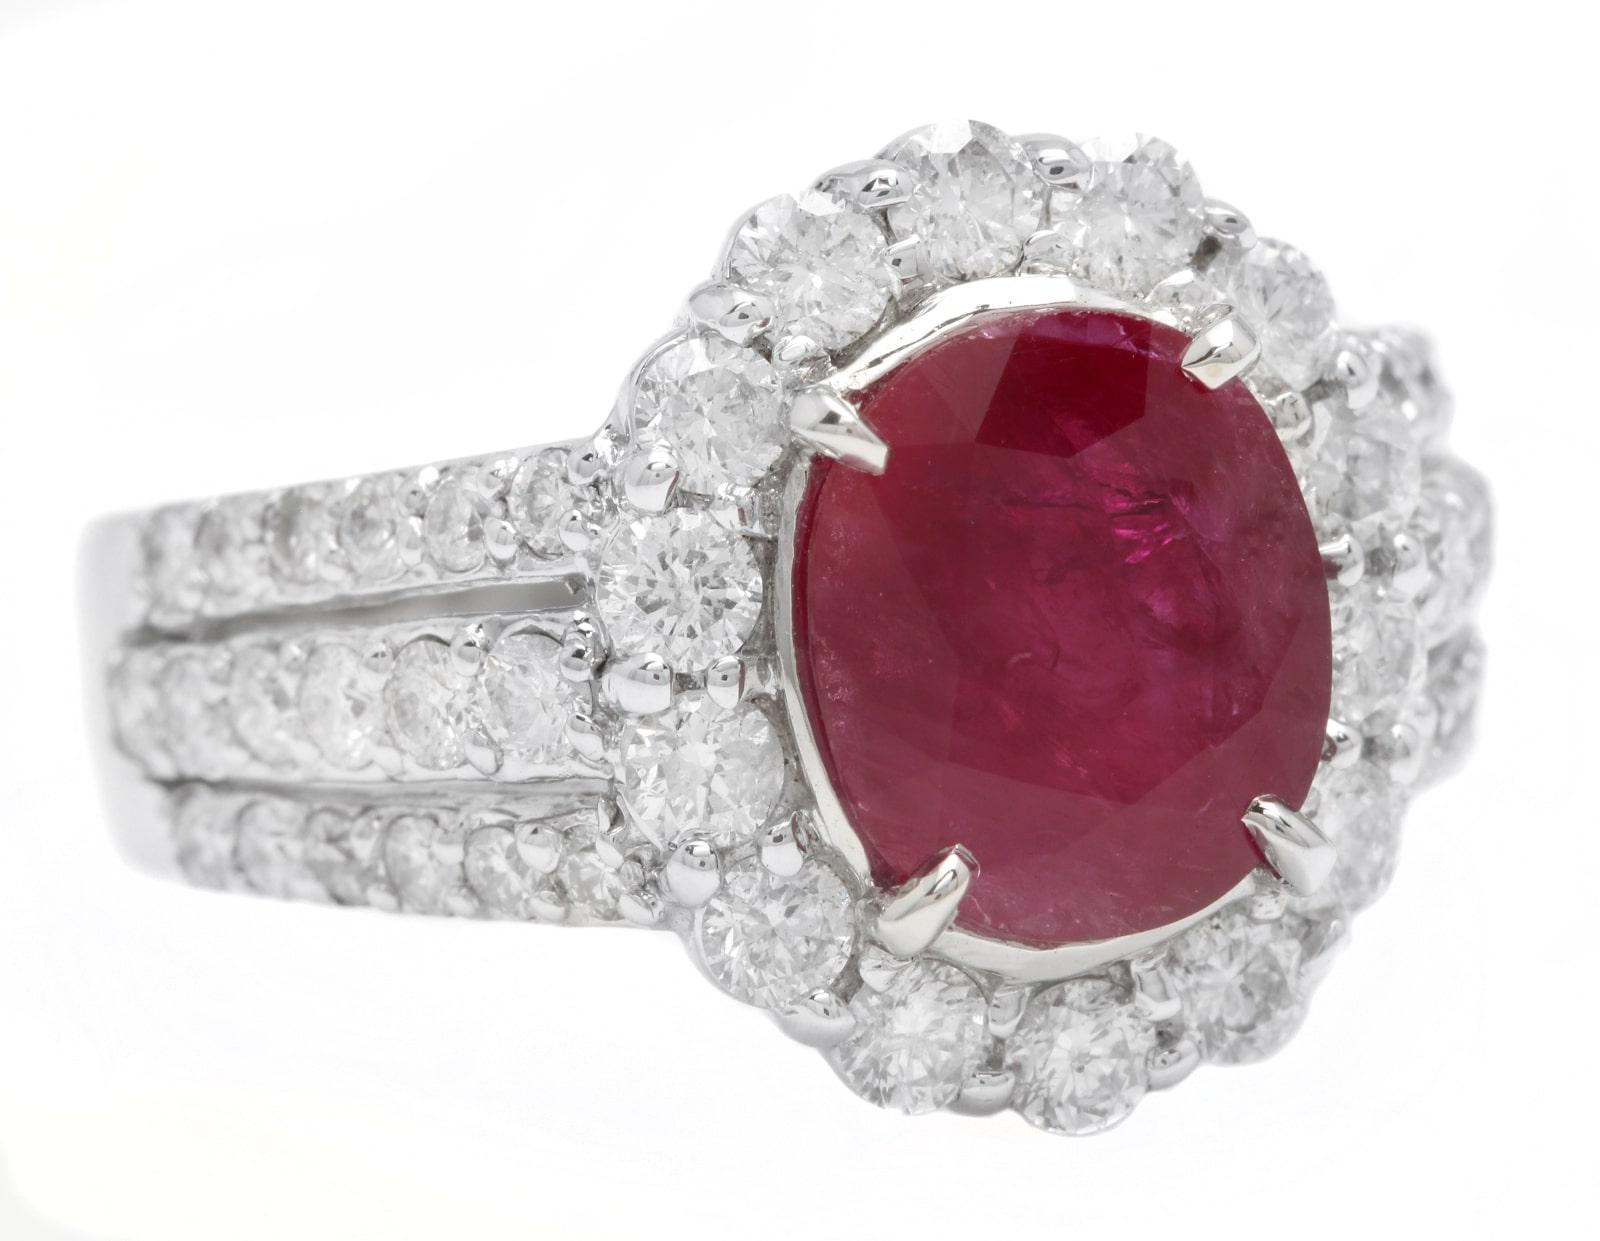 4.57 Carats Impressive Natural Red Ruby and Diamond 14K White Gold Ring

Suggested Replacement Value $8,000.00

Total Natural Red Ruby Weight is: Approx. 3.15 Carats 

Ruby Measures: Approx. 9.28 X 7.96mm 

Natural Round Diamonds Weight: Approx.